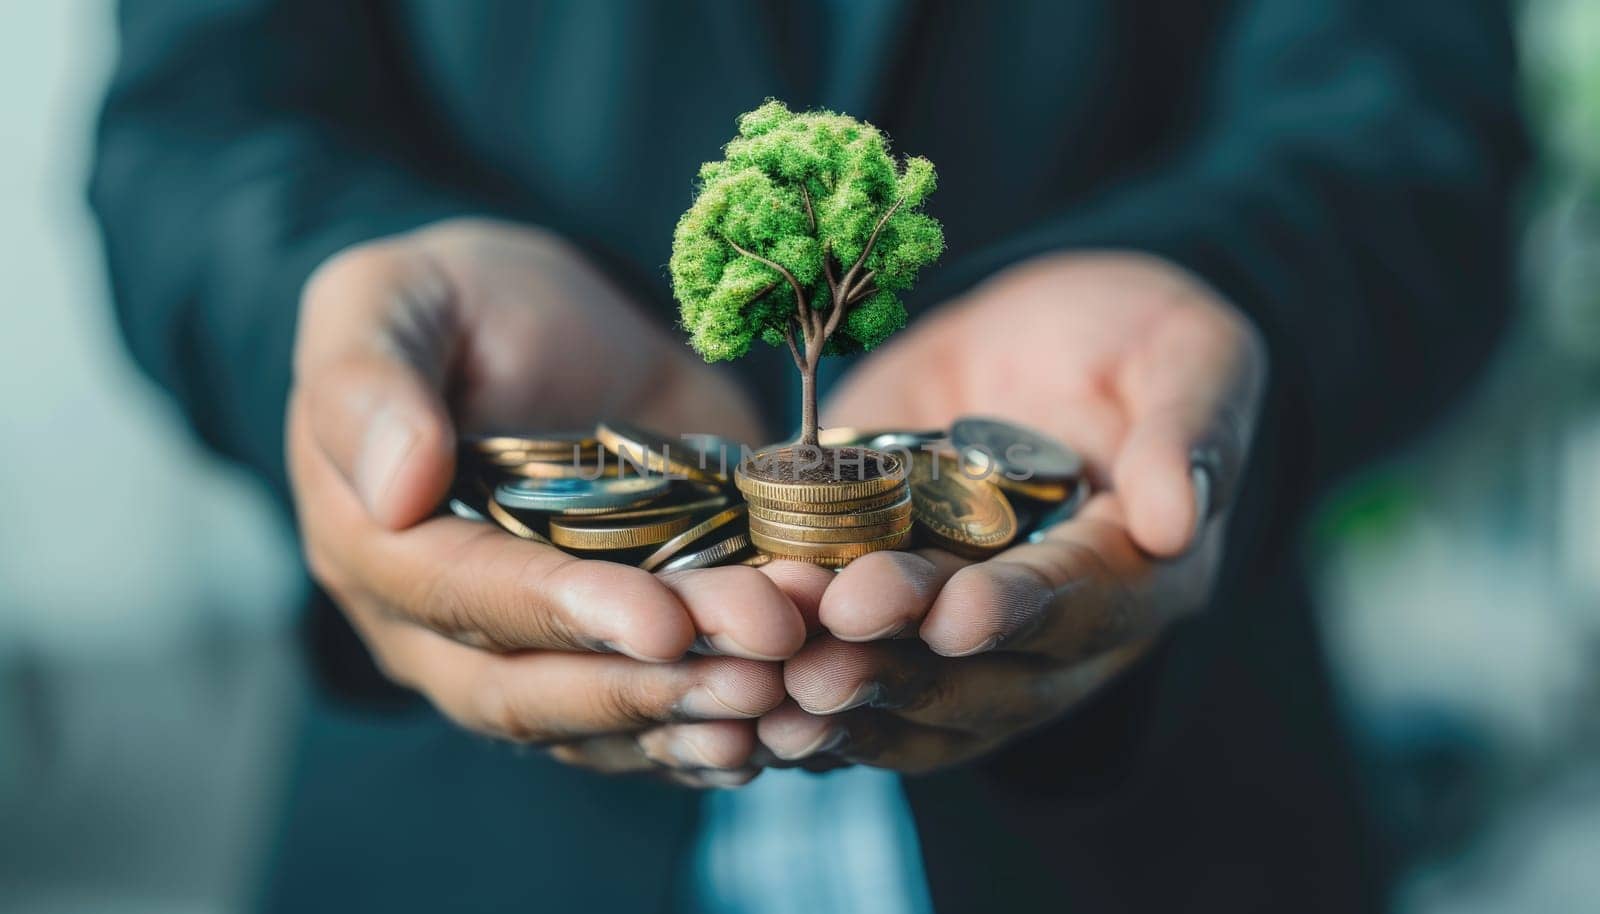 A person is holding a small tree and a pile of coins by AI generated image.